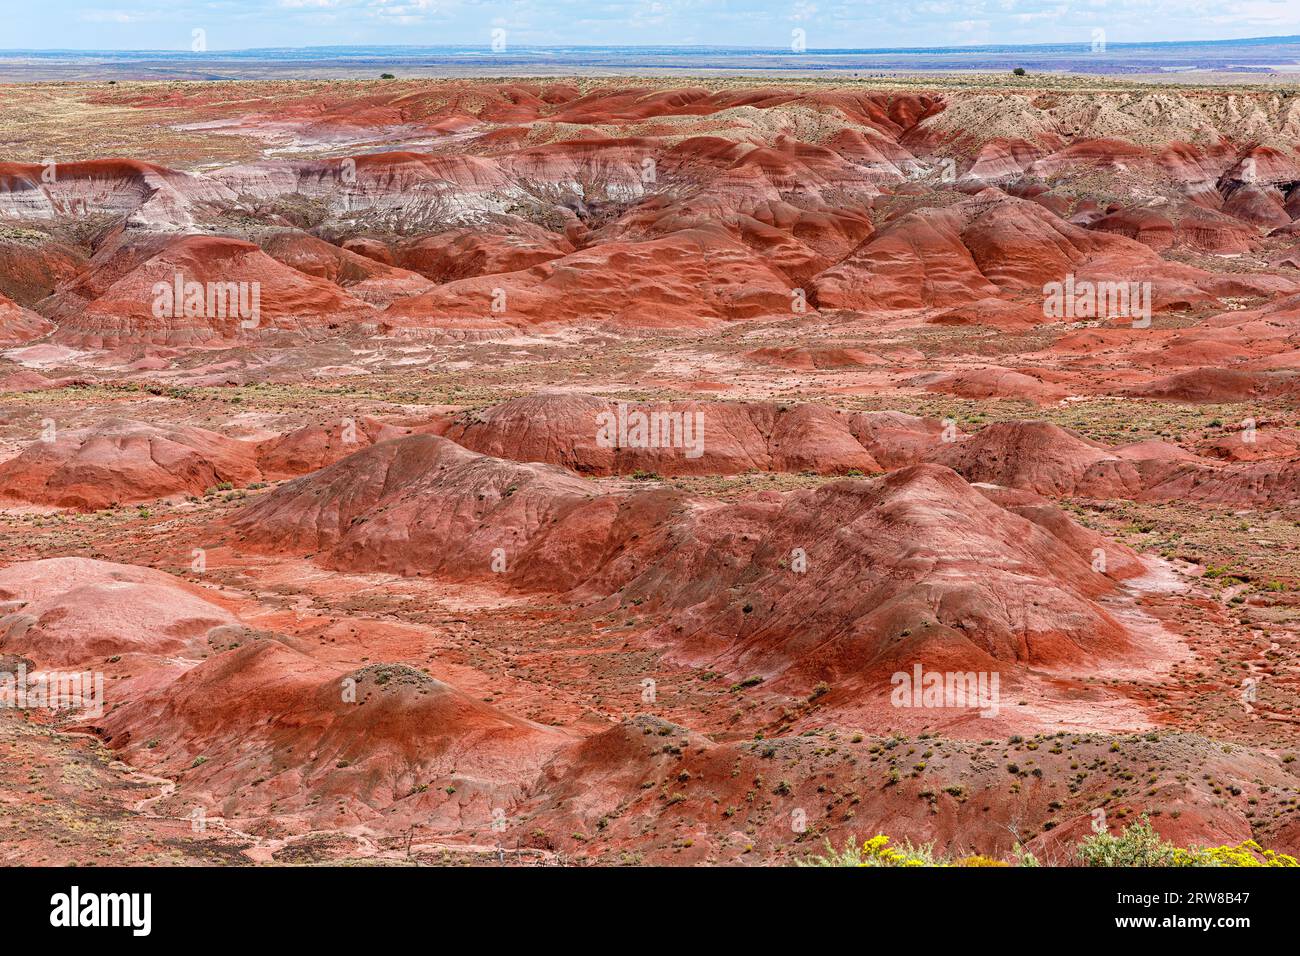 Painted Desert, Petrified Forest National Park, Arizona, USA Banque D'Images